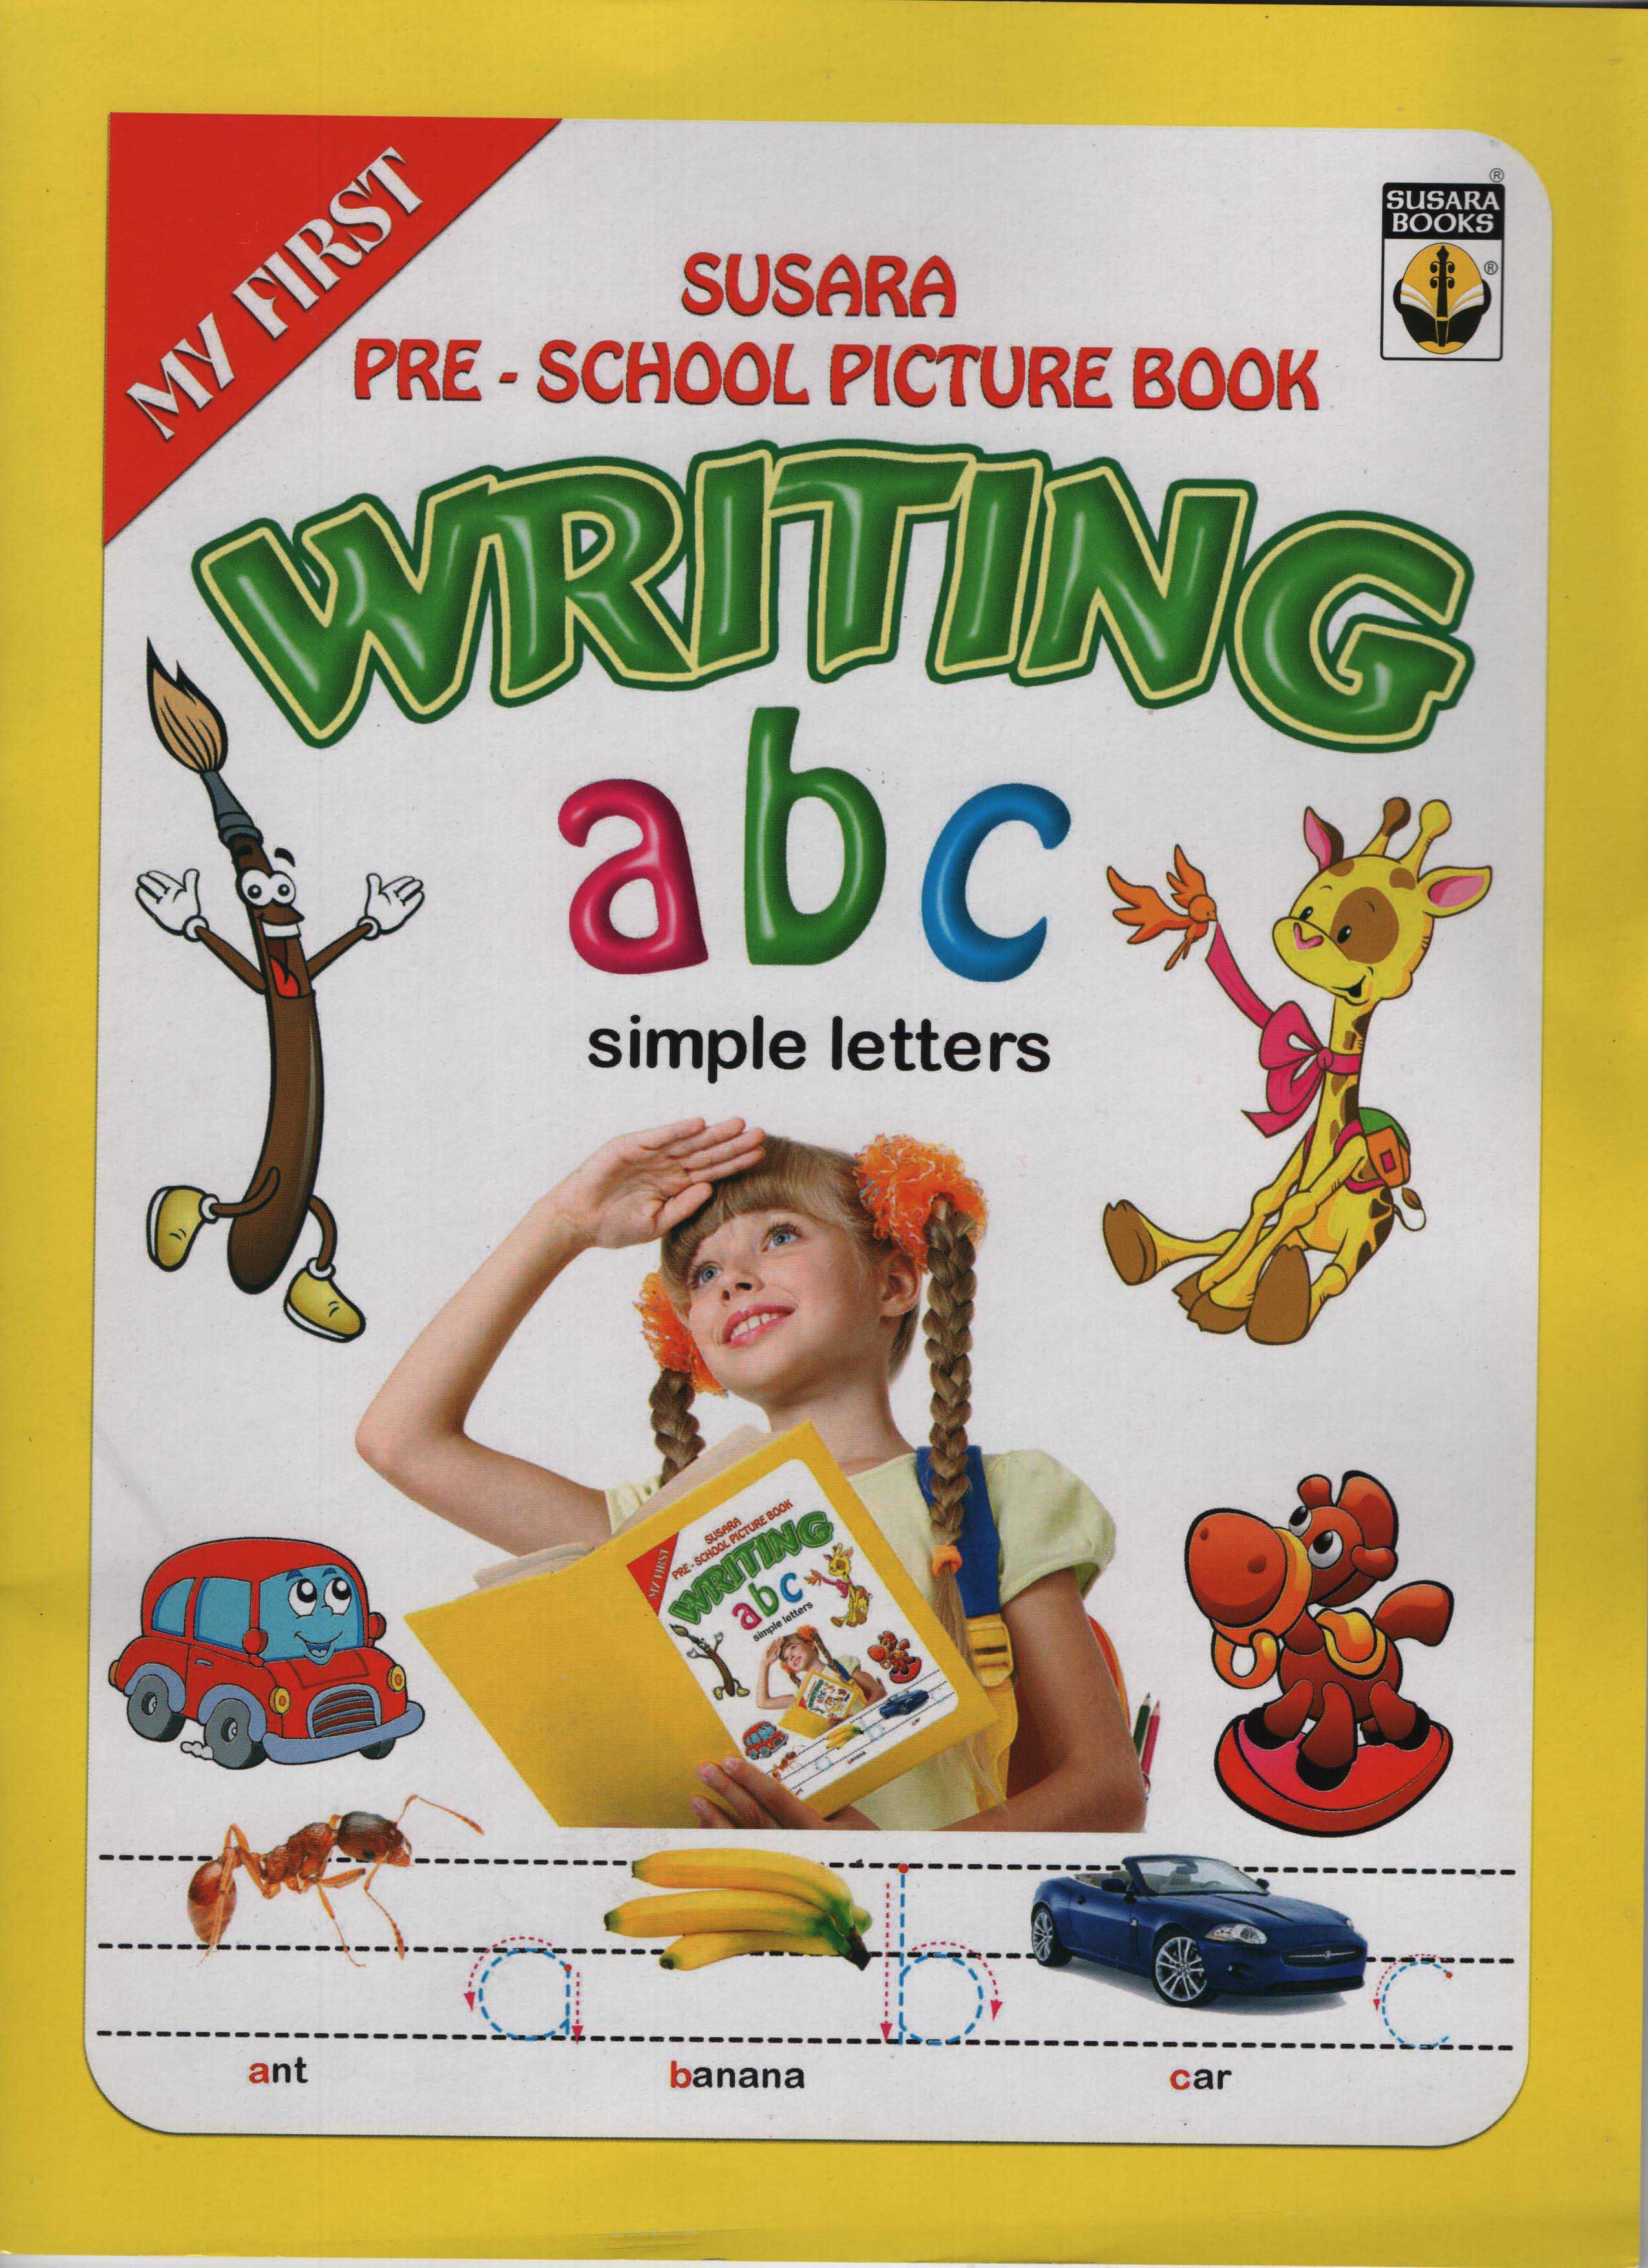 My First Susara Pre - School Picture Book Writing abc Simple letters